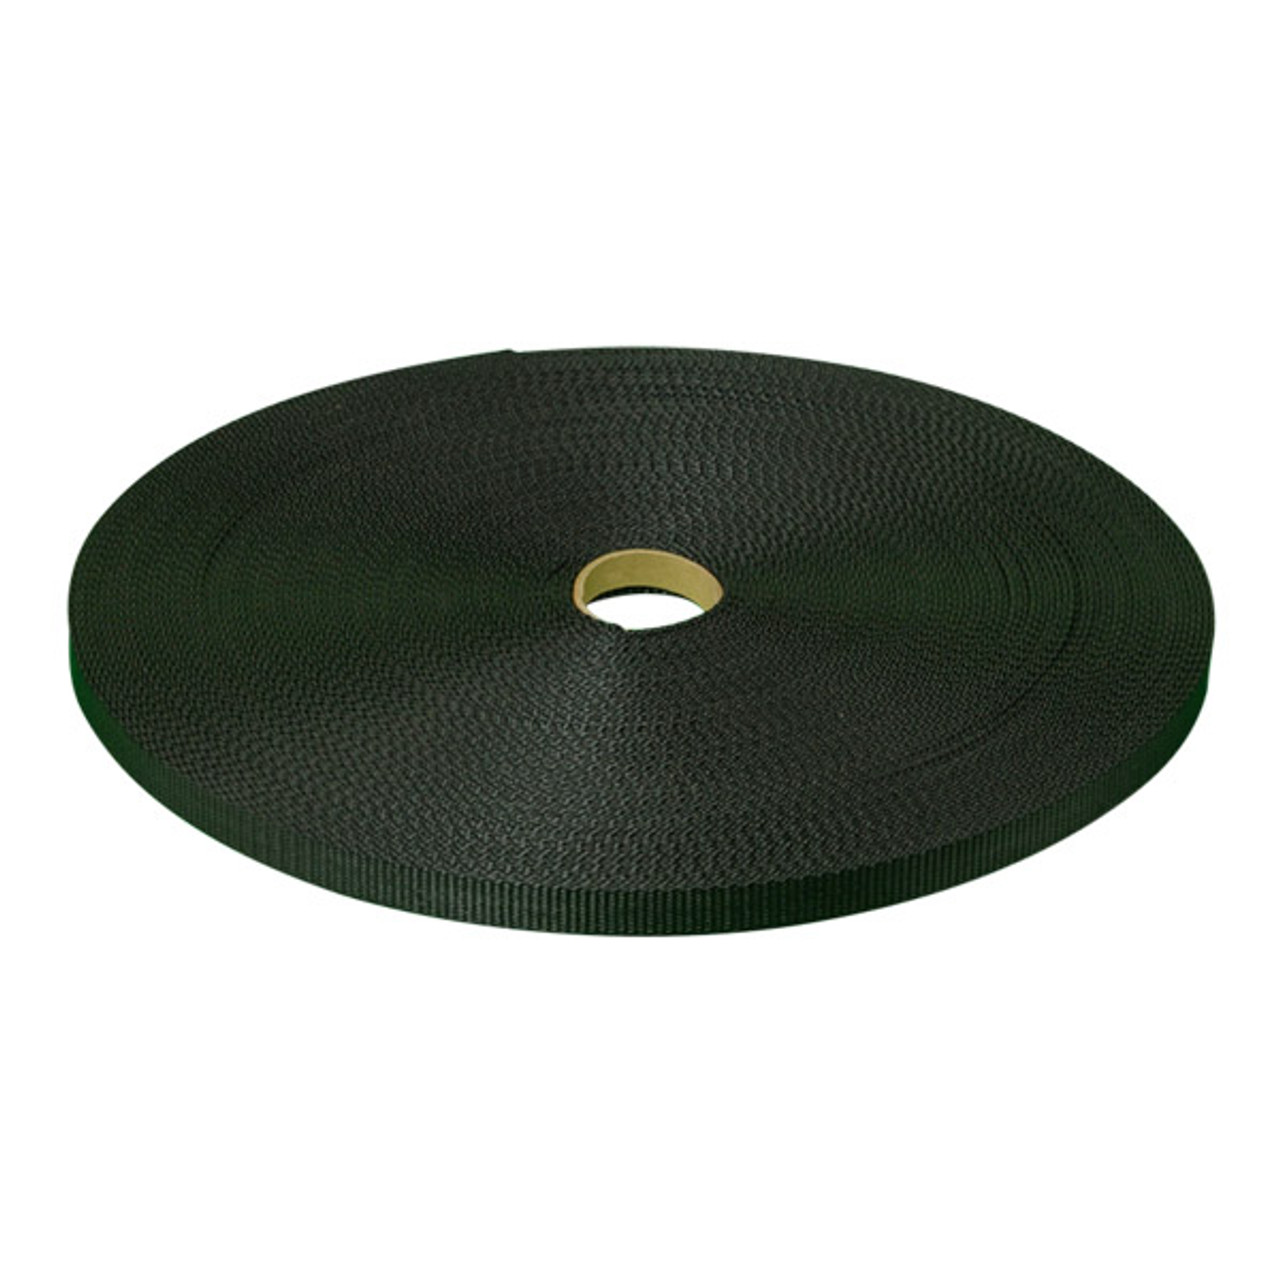 Great Deals On Flexible And Durable Wholesale 2 inch nylon webbing 